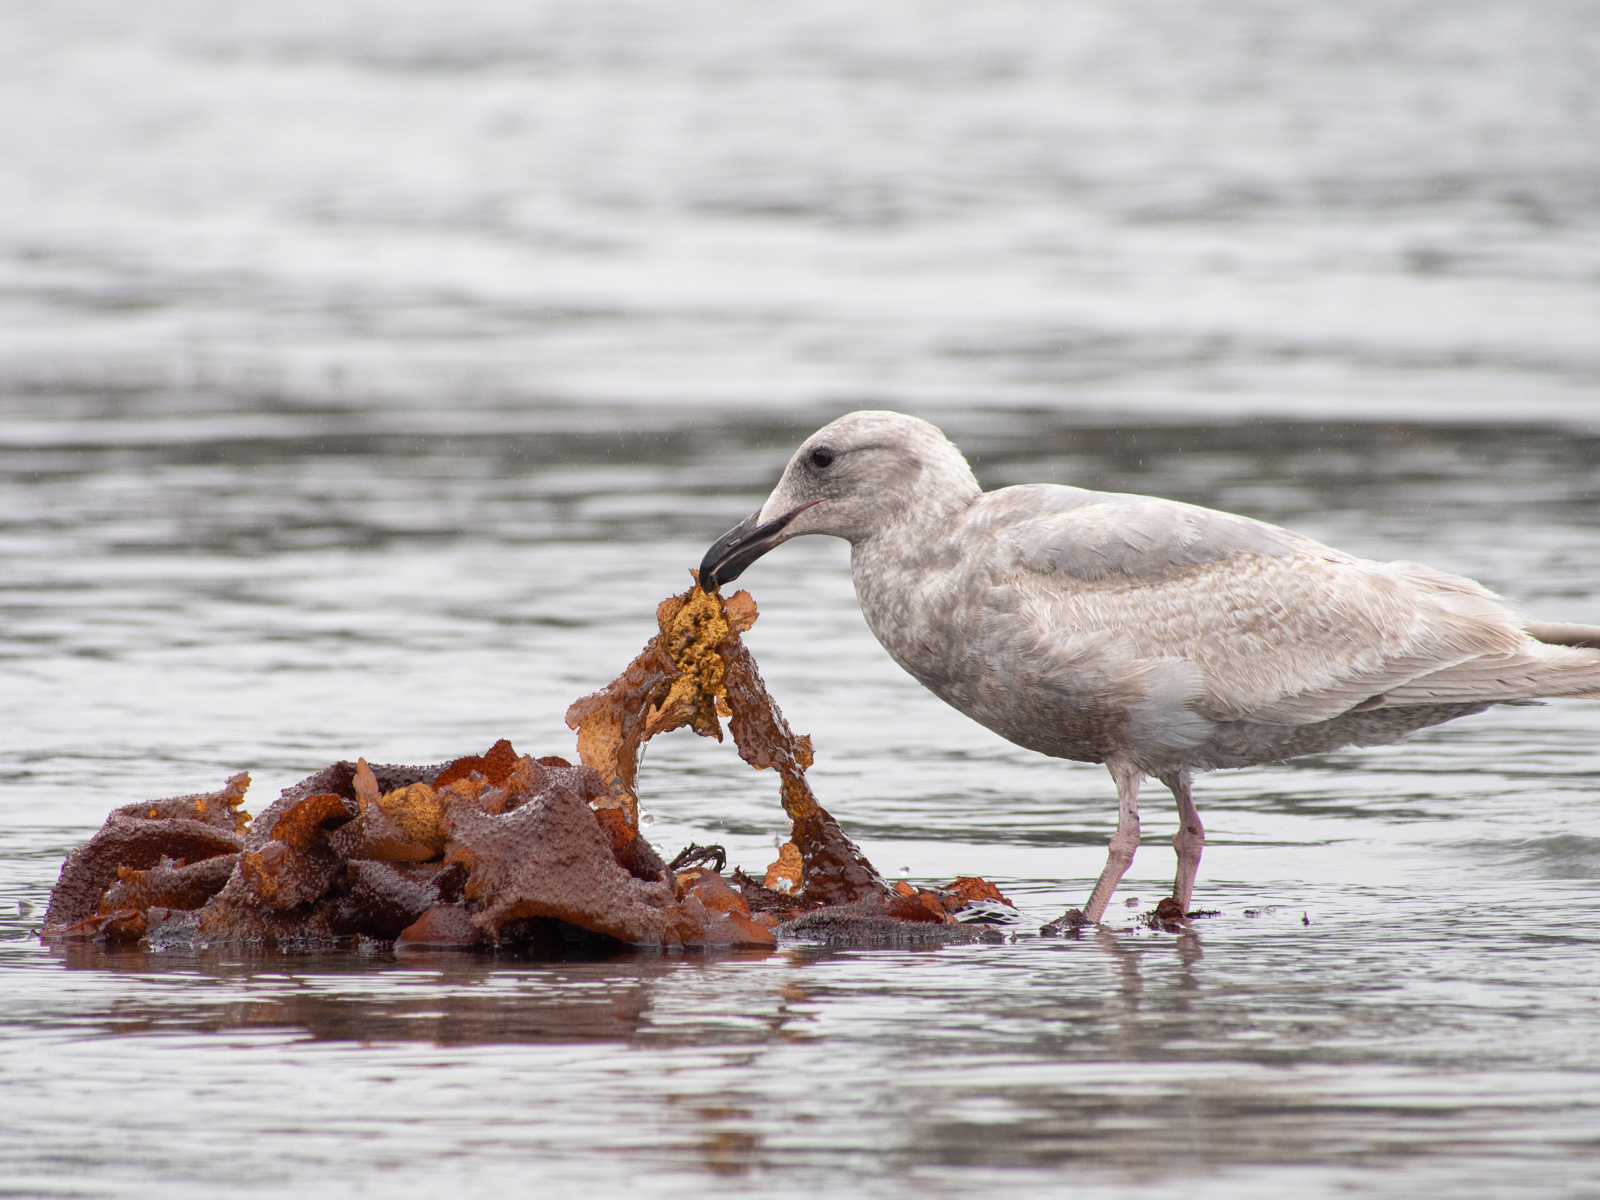 Glaucous-winged Gull with Seaweed